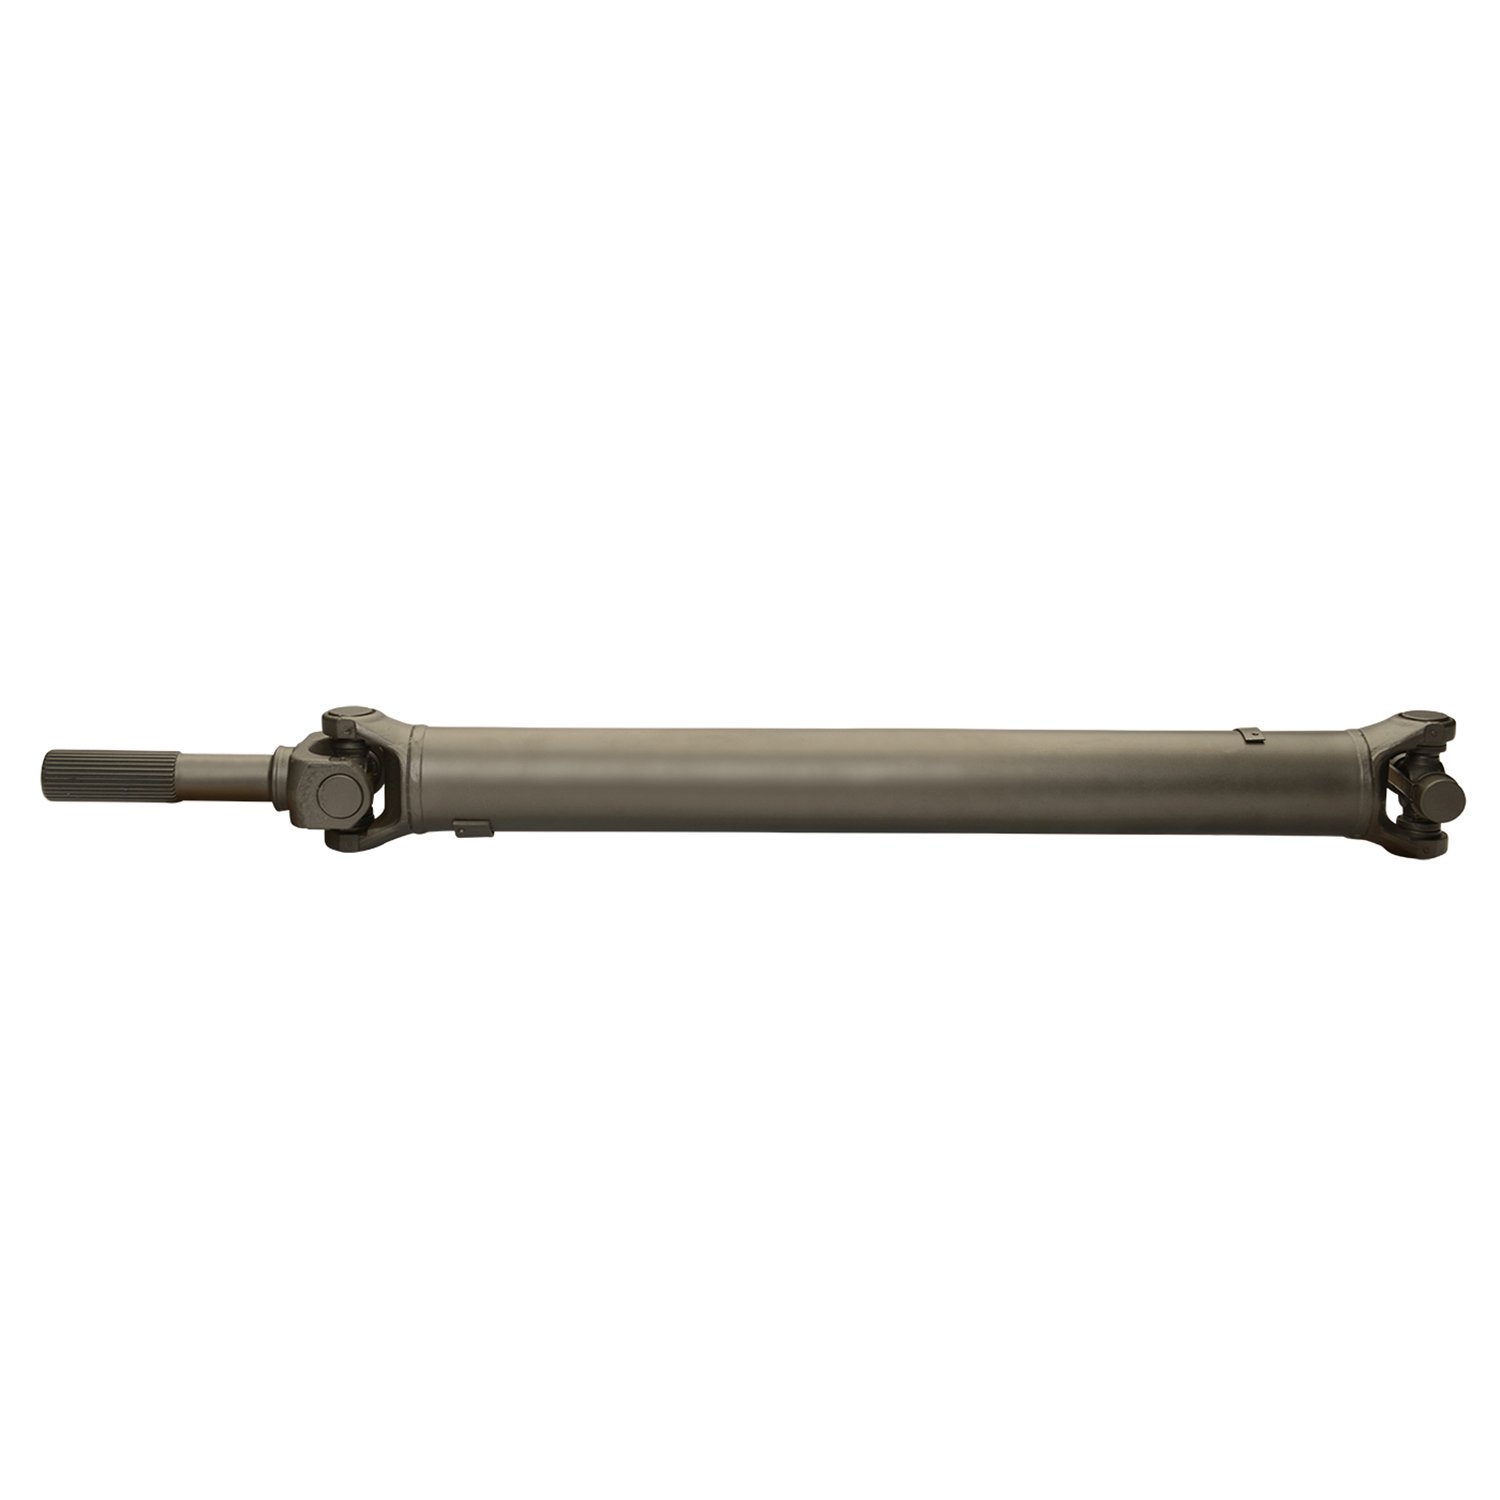 USA Standard ZDS9307 Front Driveshaft, Cadillac Escalade, GM Truck/Suv, 27 in. Weld-To-Weld